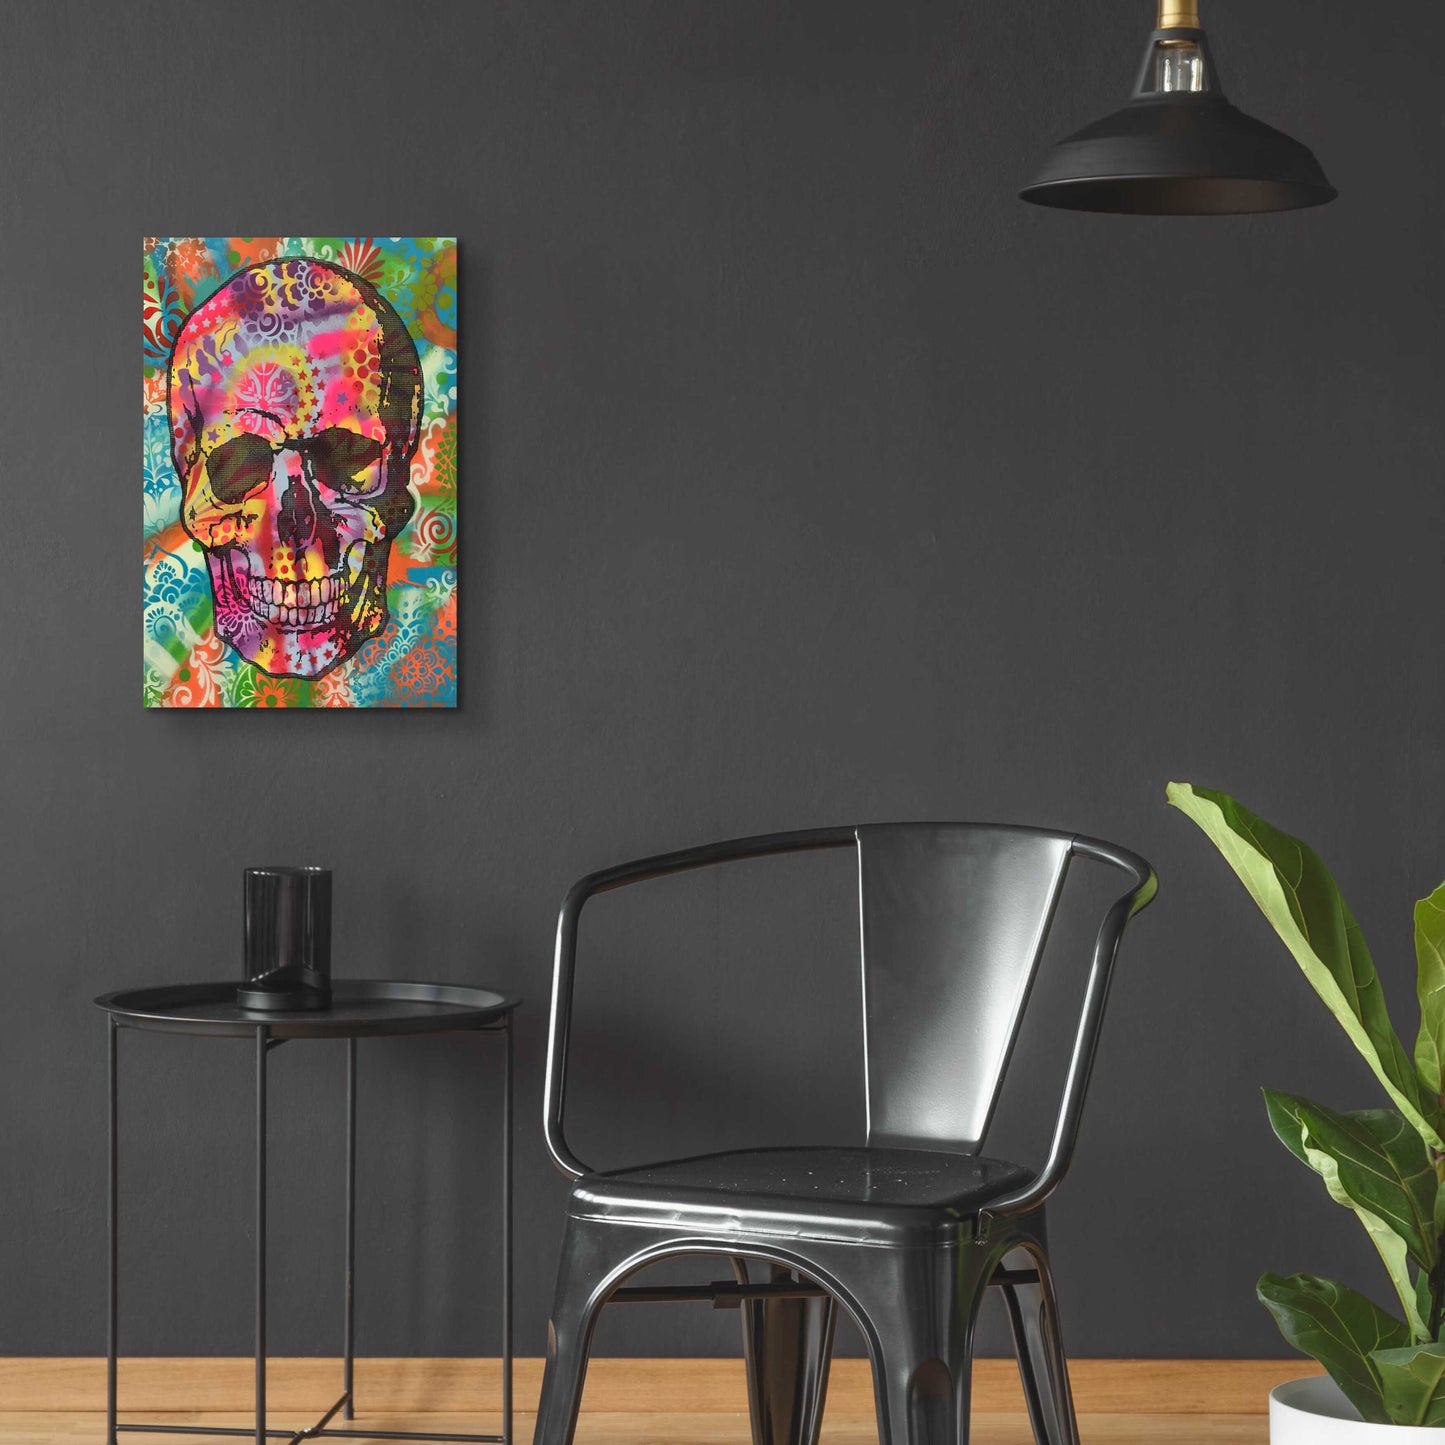 Epic Art 'Skull 1UP' by Dean Russo, Acrylic Glass Wall Art,16x24